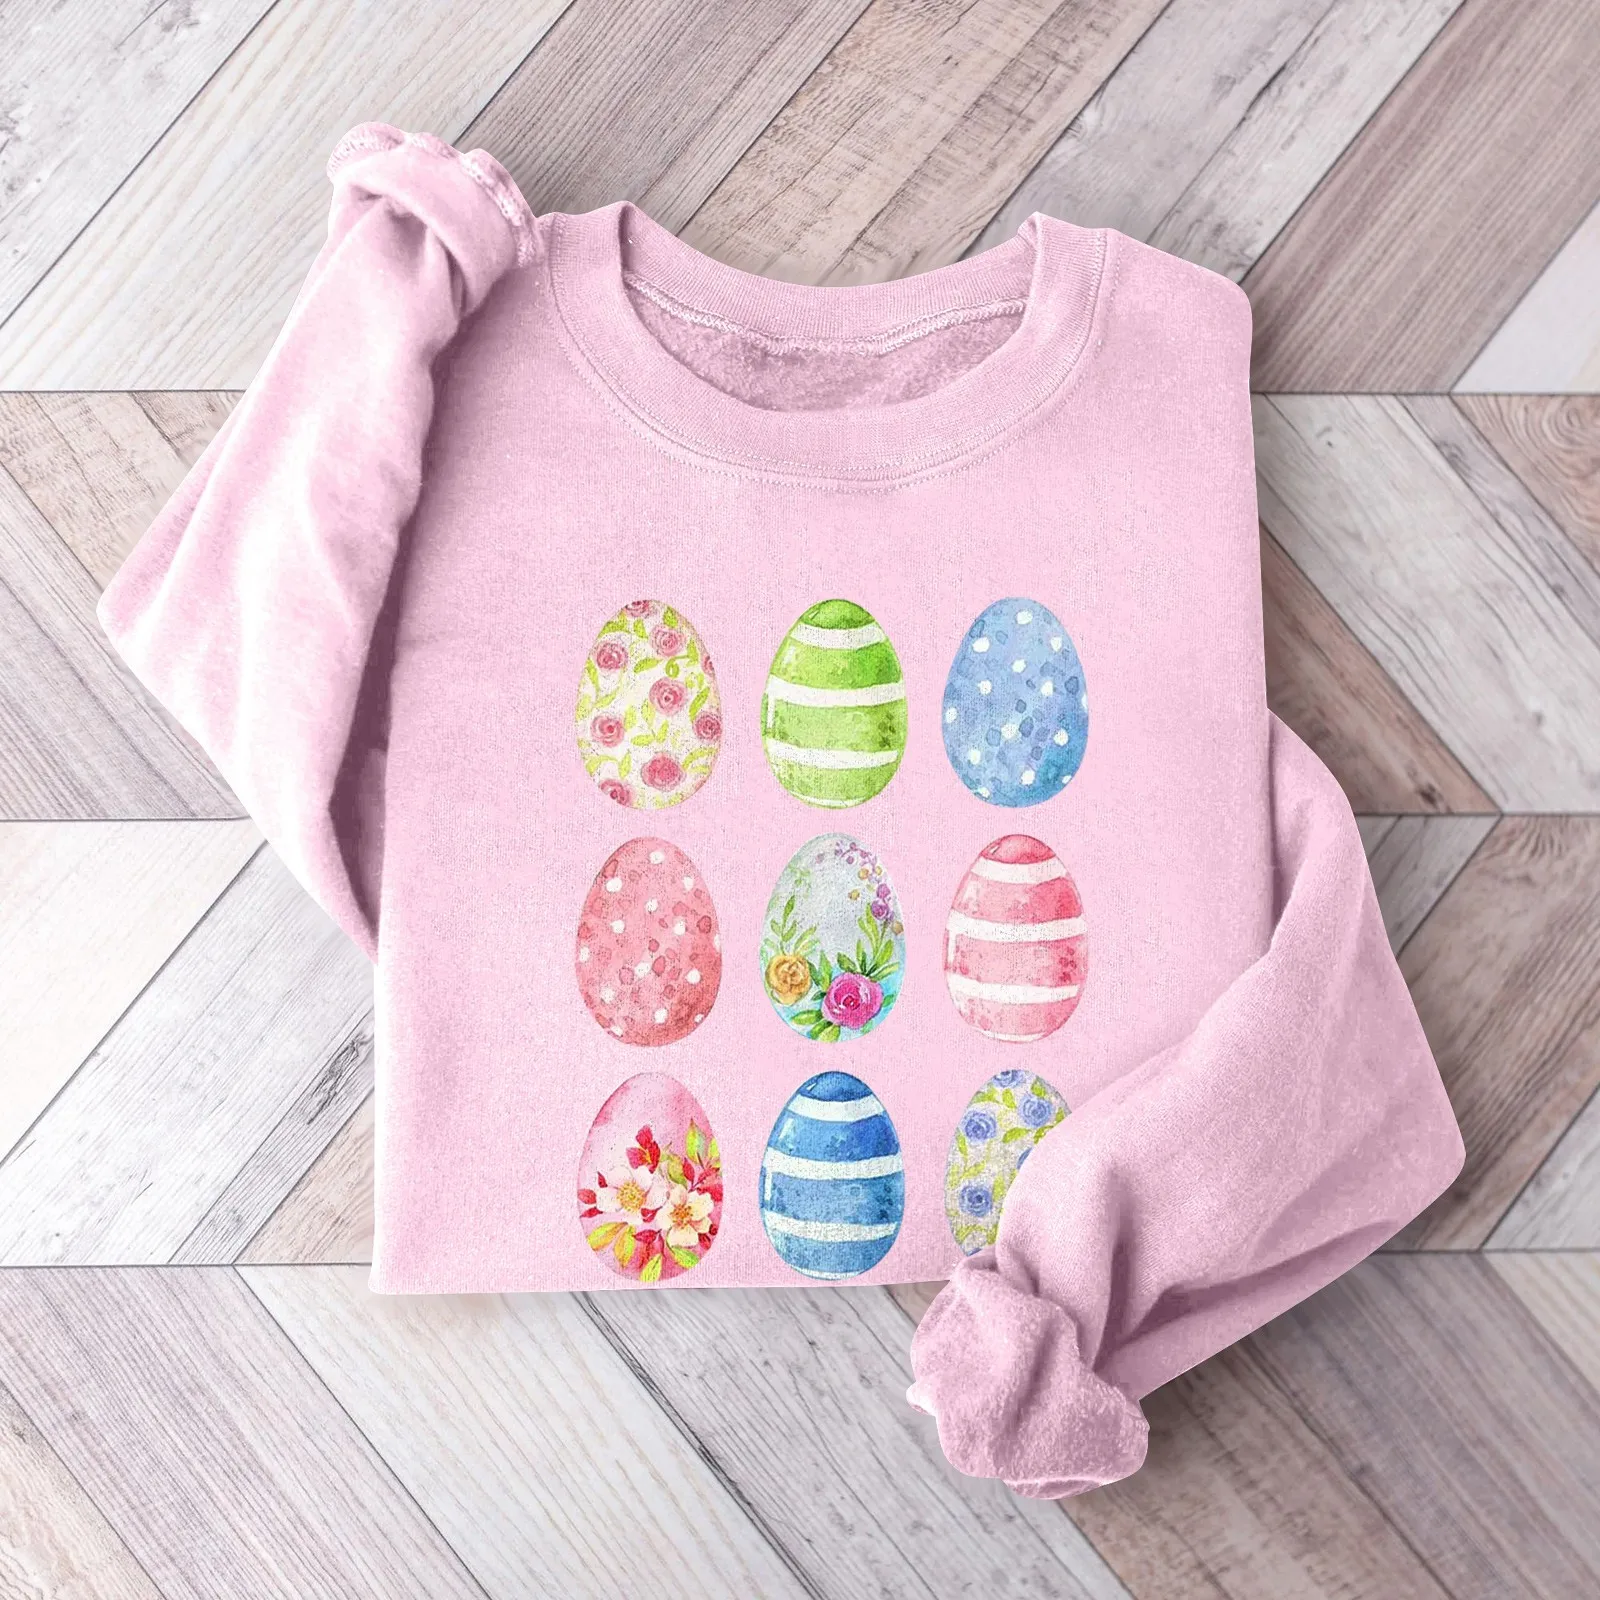 

Sweatshirts And Versatile Sweatshirts Printed Round Neck Women Summer Top For Crew Neck Happy Easter Print Colorful Eggs Pullove